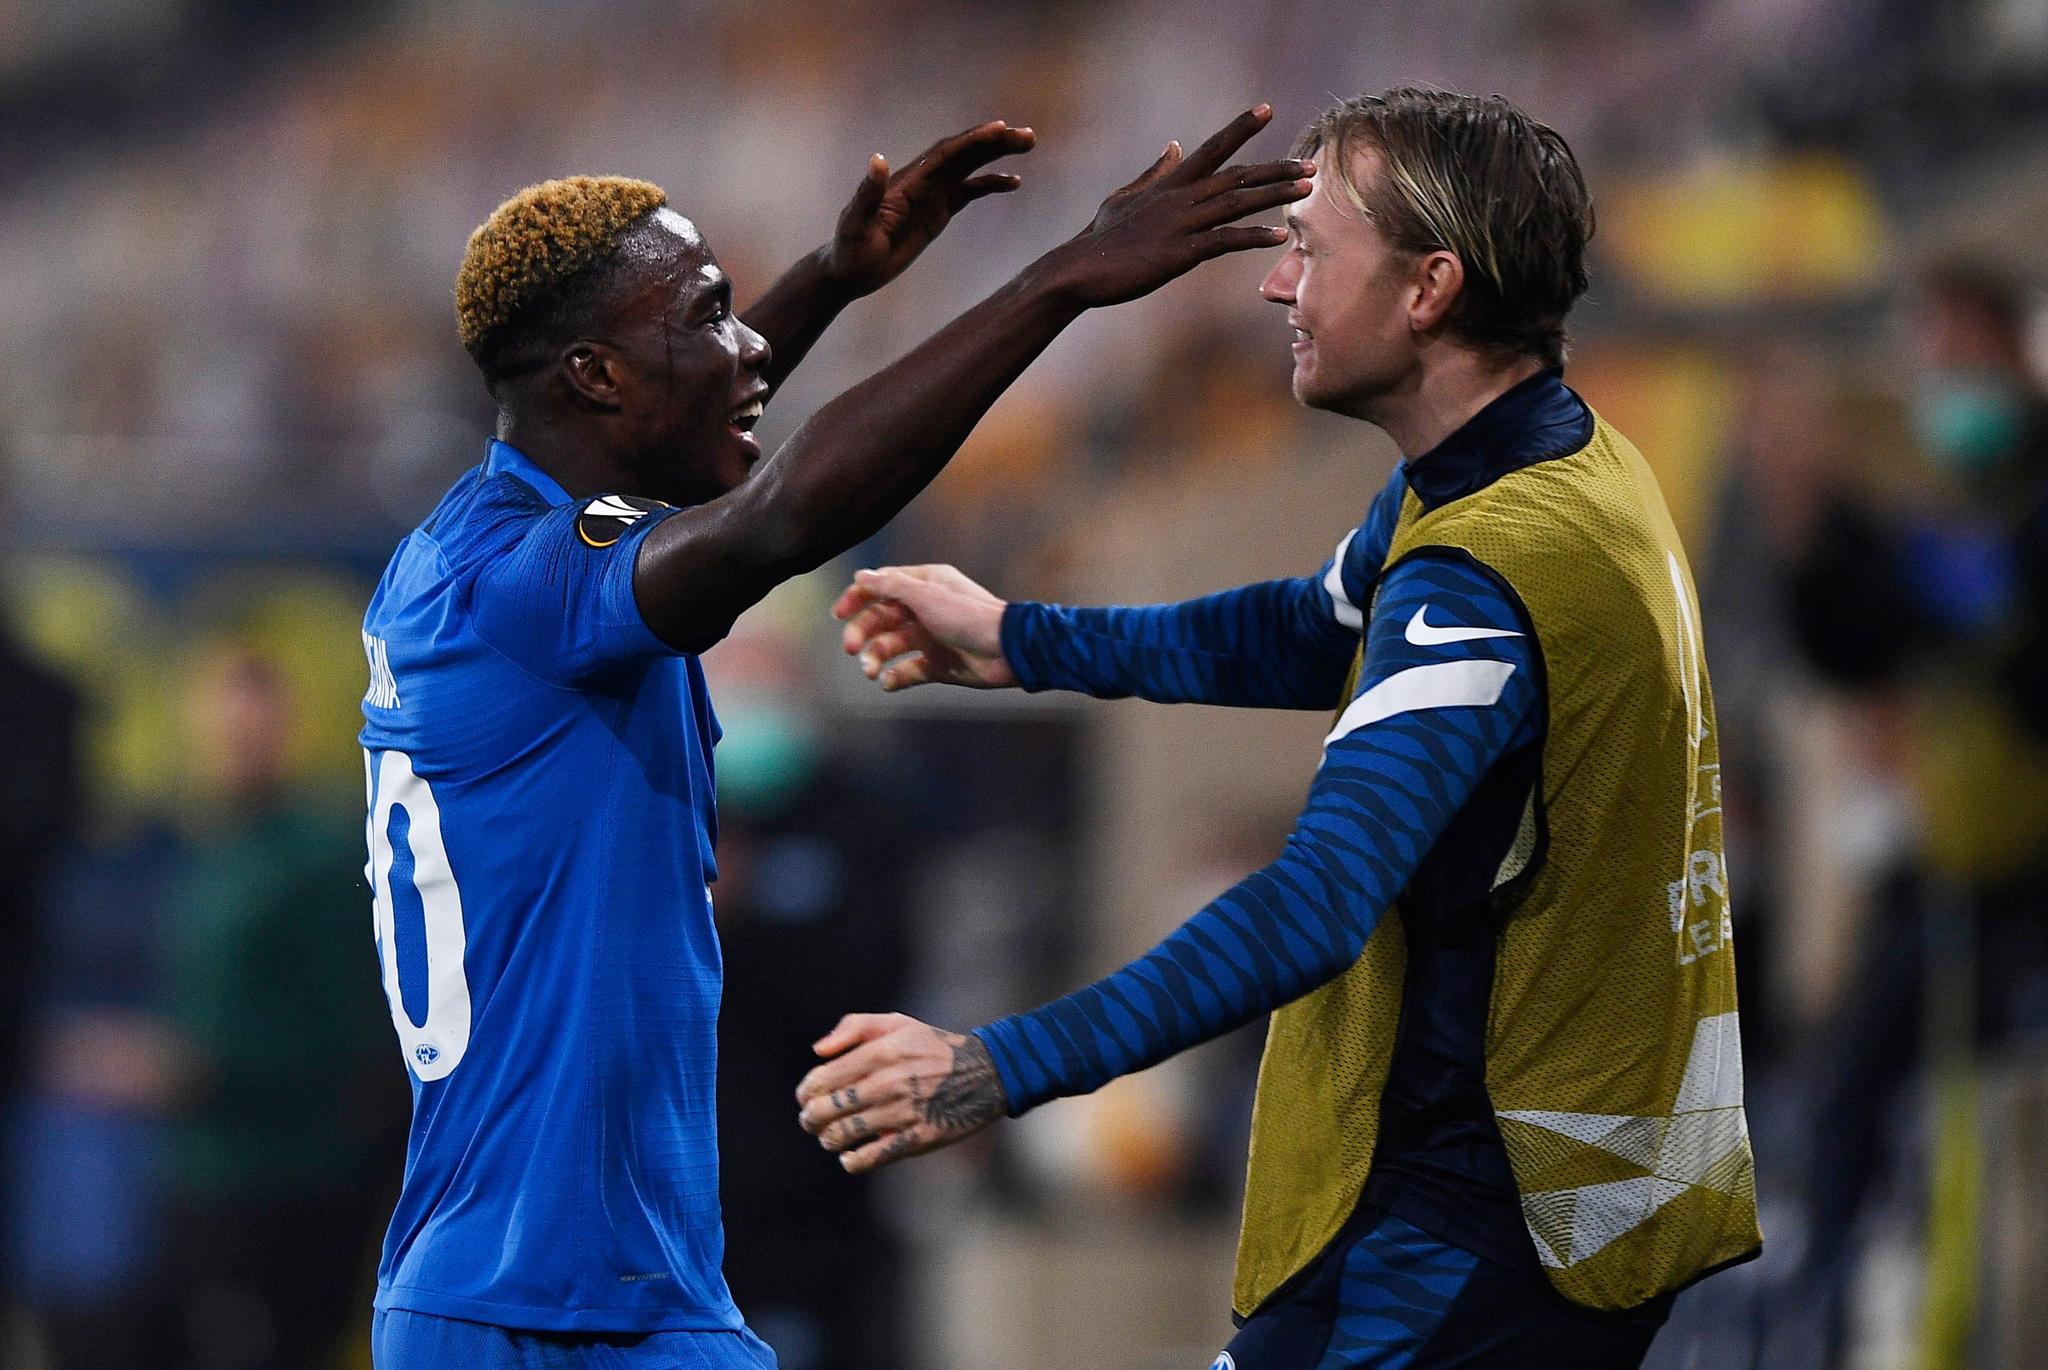 Liverpool reportedly have Molde striker Datro Fofana in their sights